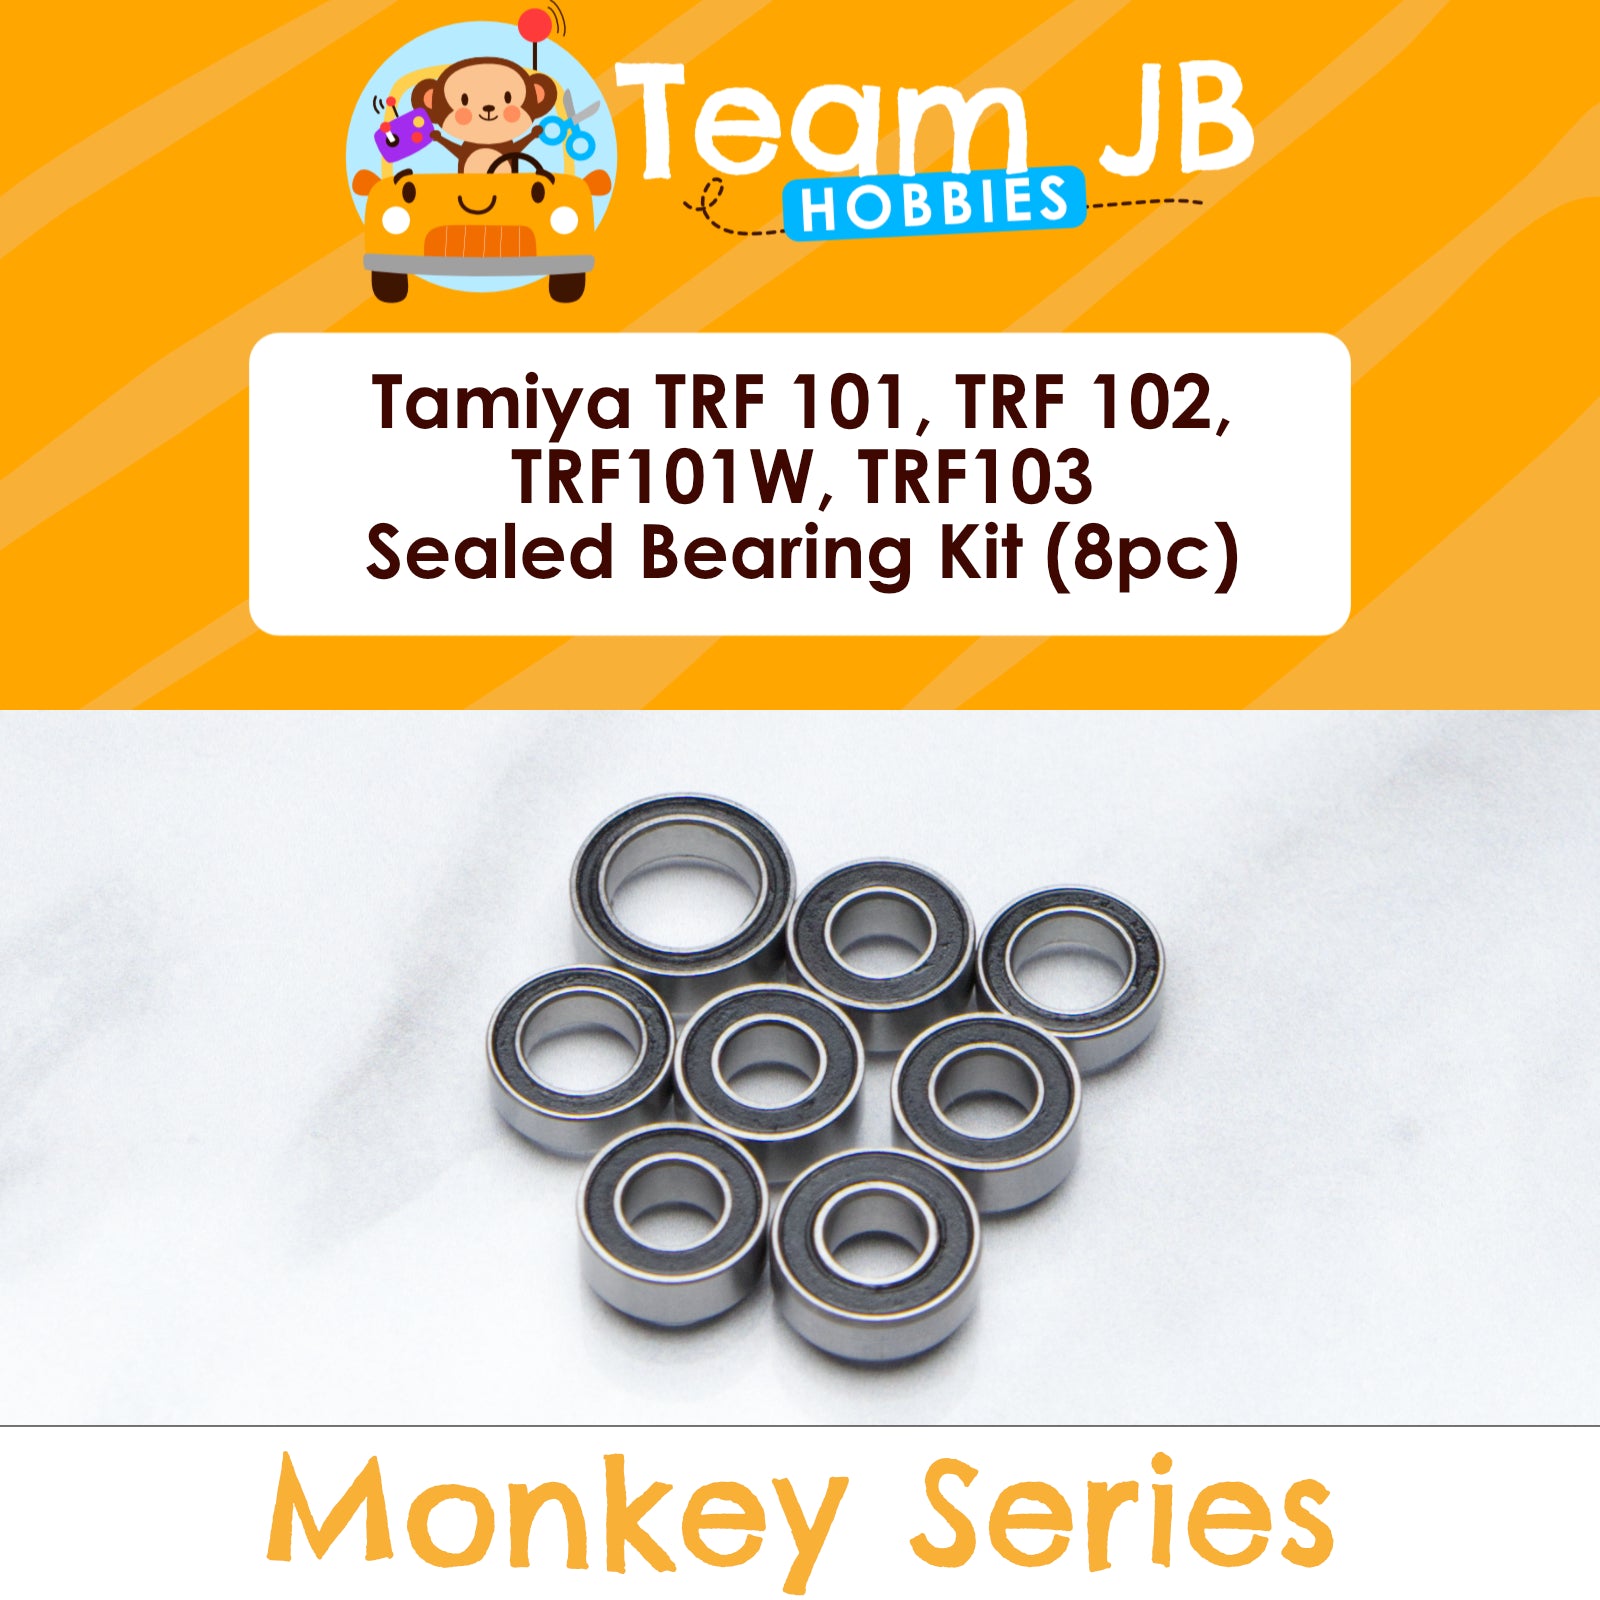 Tamiya TRF 101, TRF 102, TRF101W Chassis, TRF103 Chassis Kit - Sealed Bearing Kit